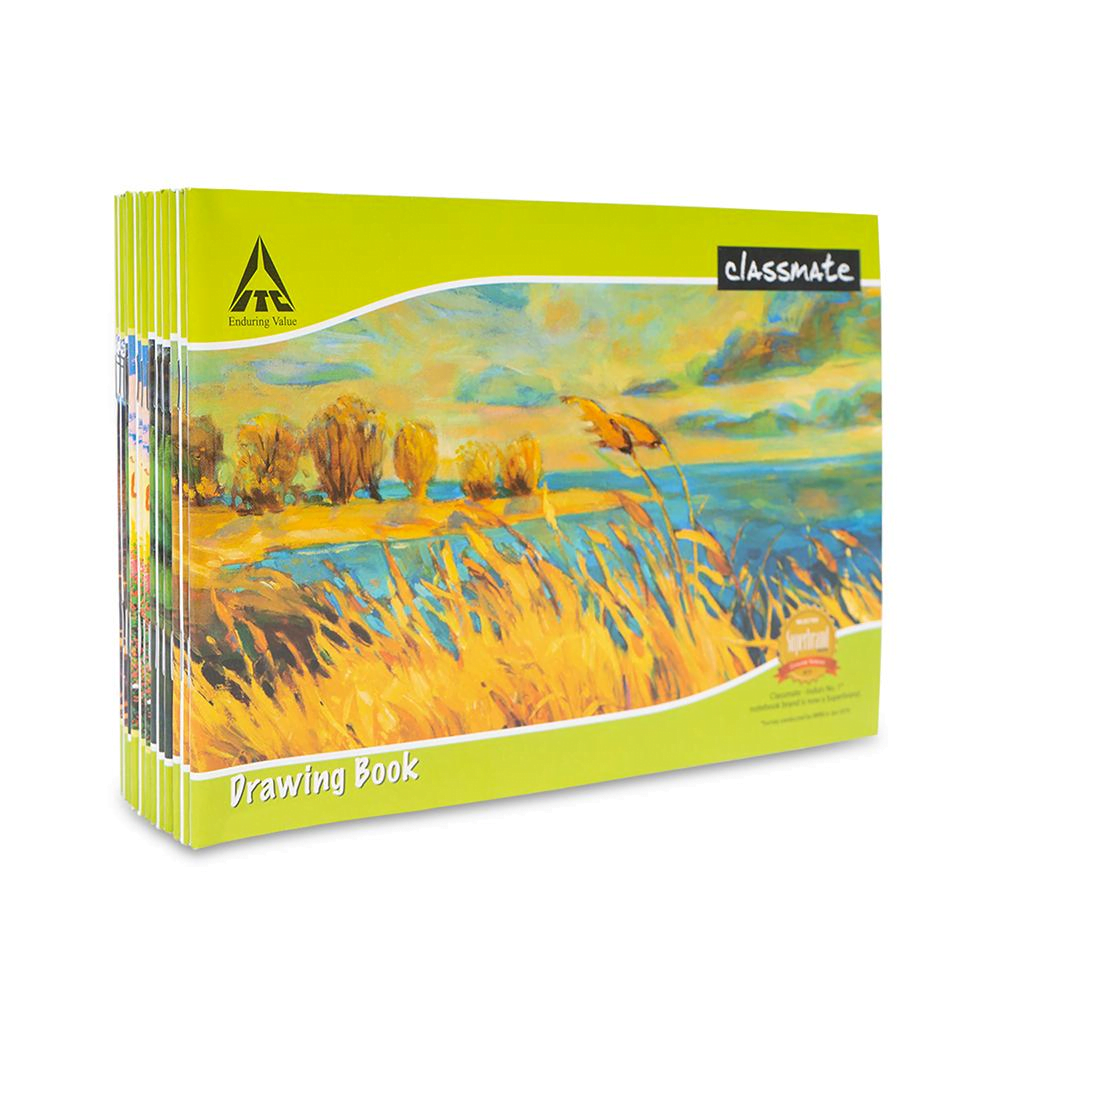 Buy Classmate Class 1-5 - Students Art Kit Online at Best Price of Rs 240 -  bigbasket